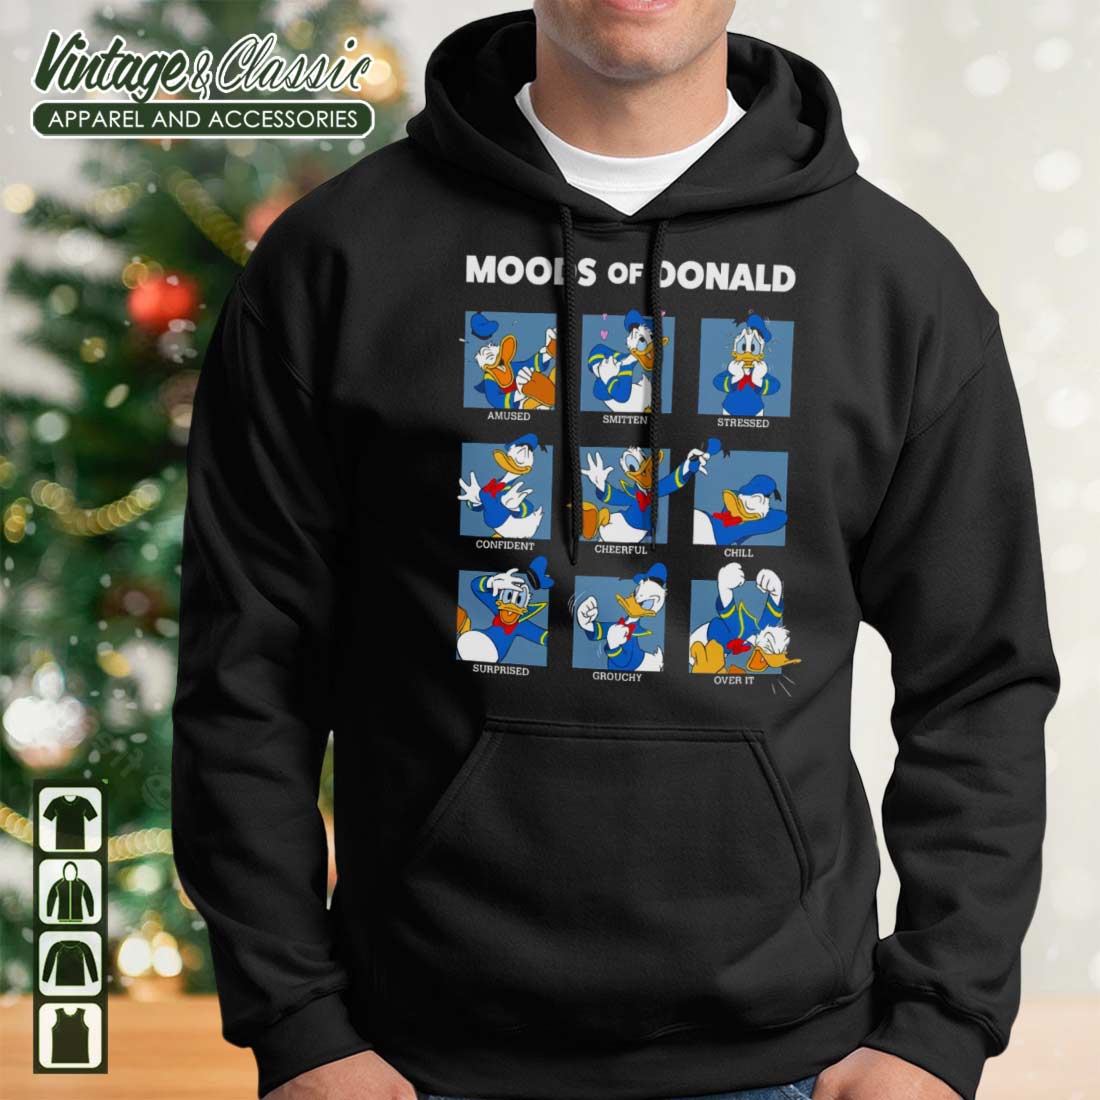 Moods Of Donald Duck, Funny Donald Face Shirt - Vintagenclassic Tee